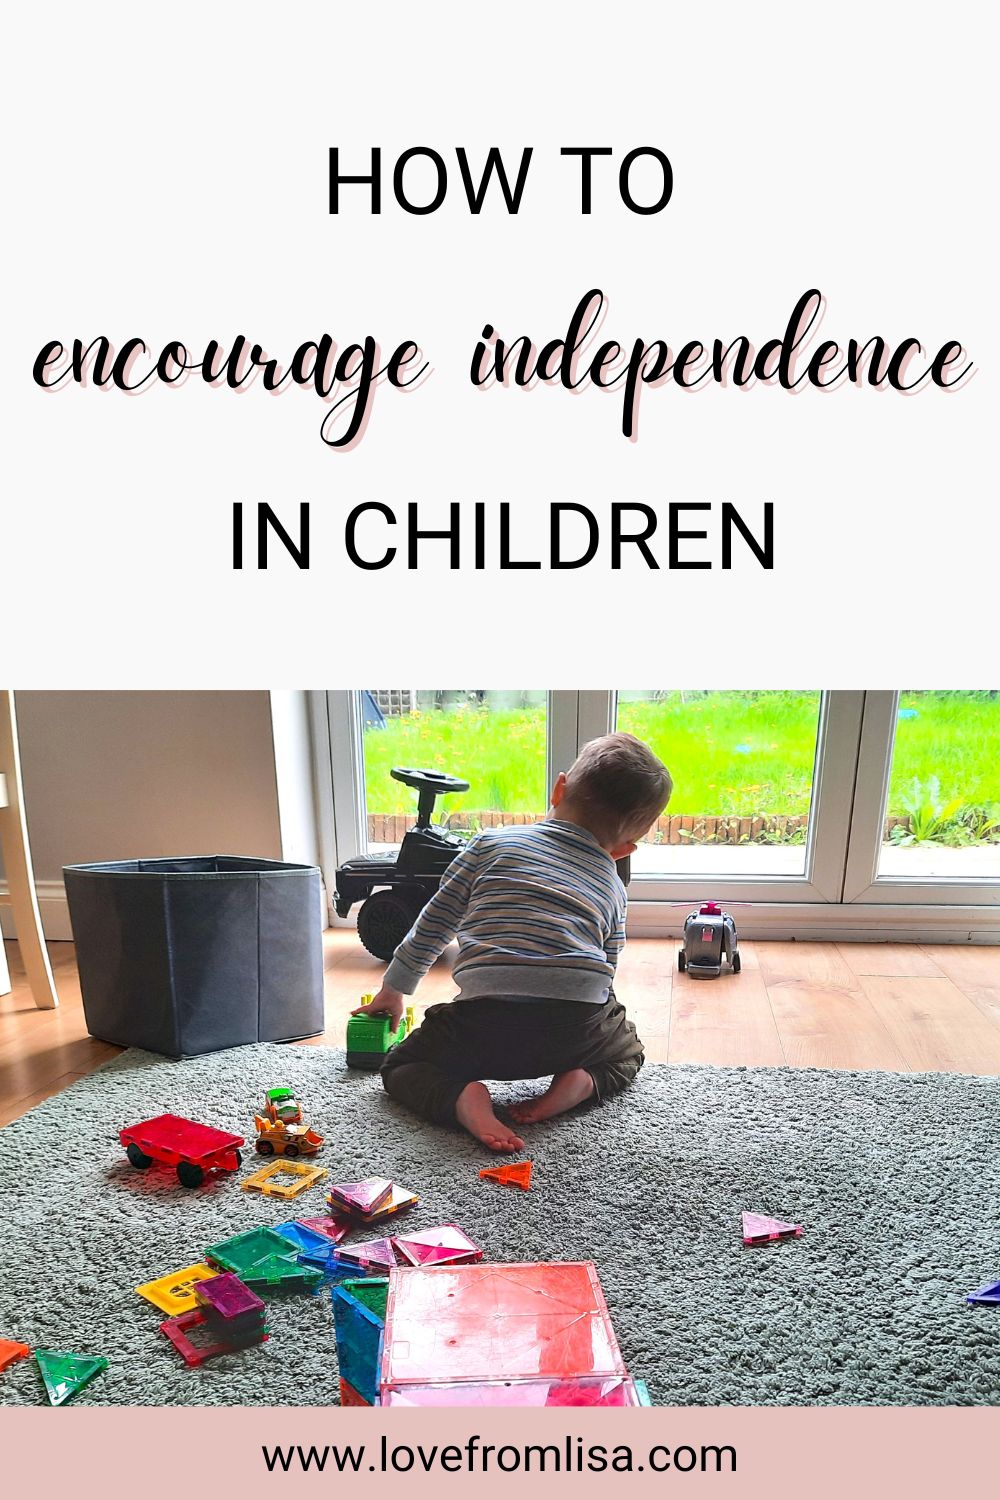 How to encourage independence in children